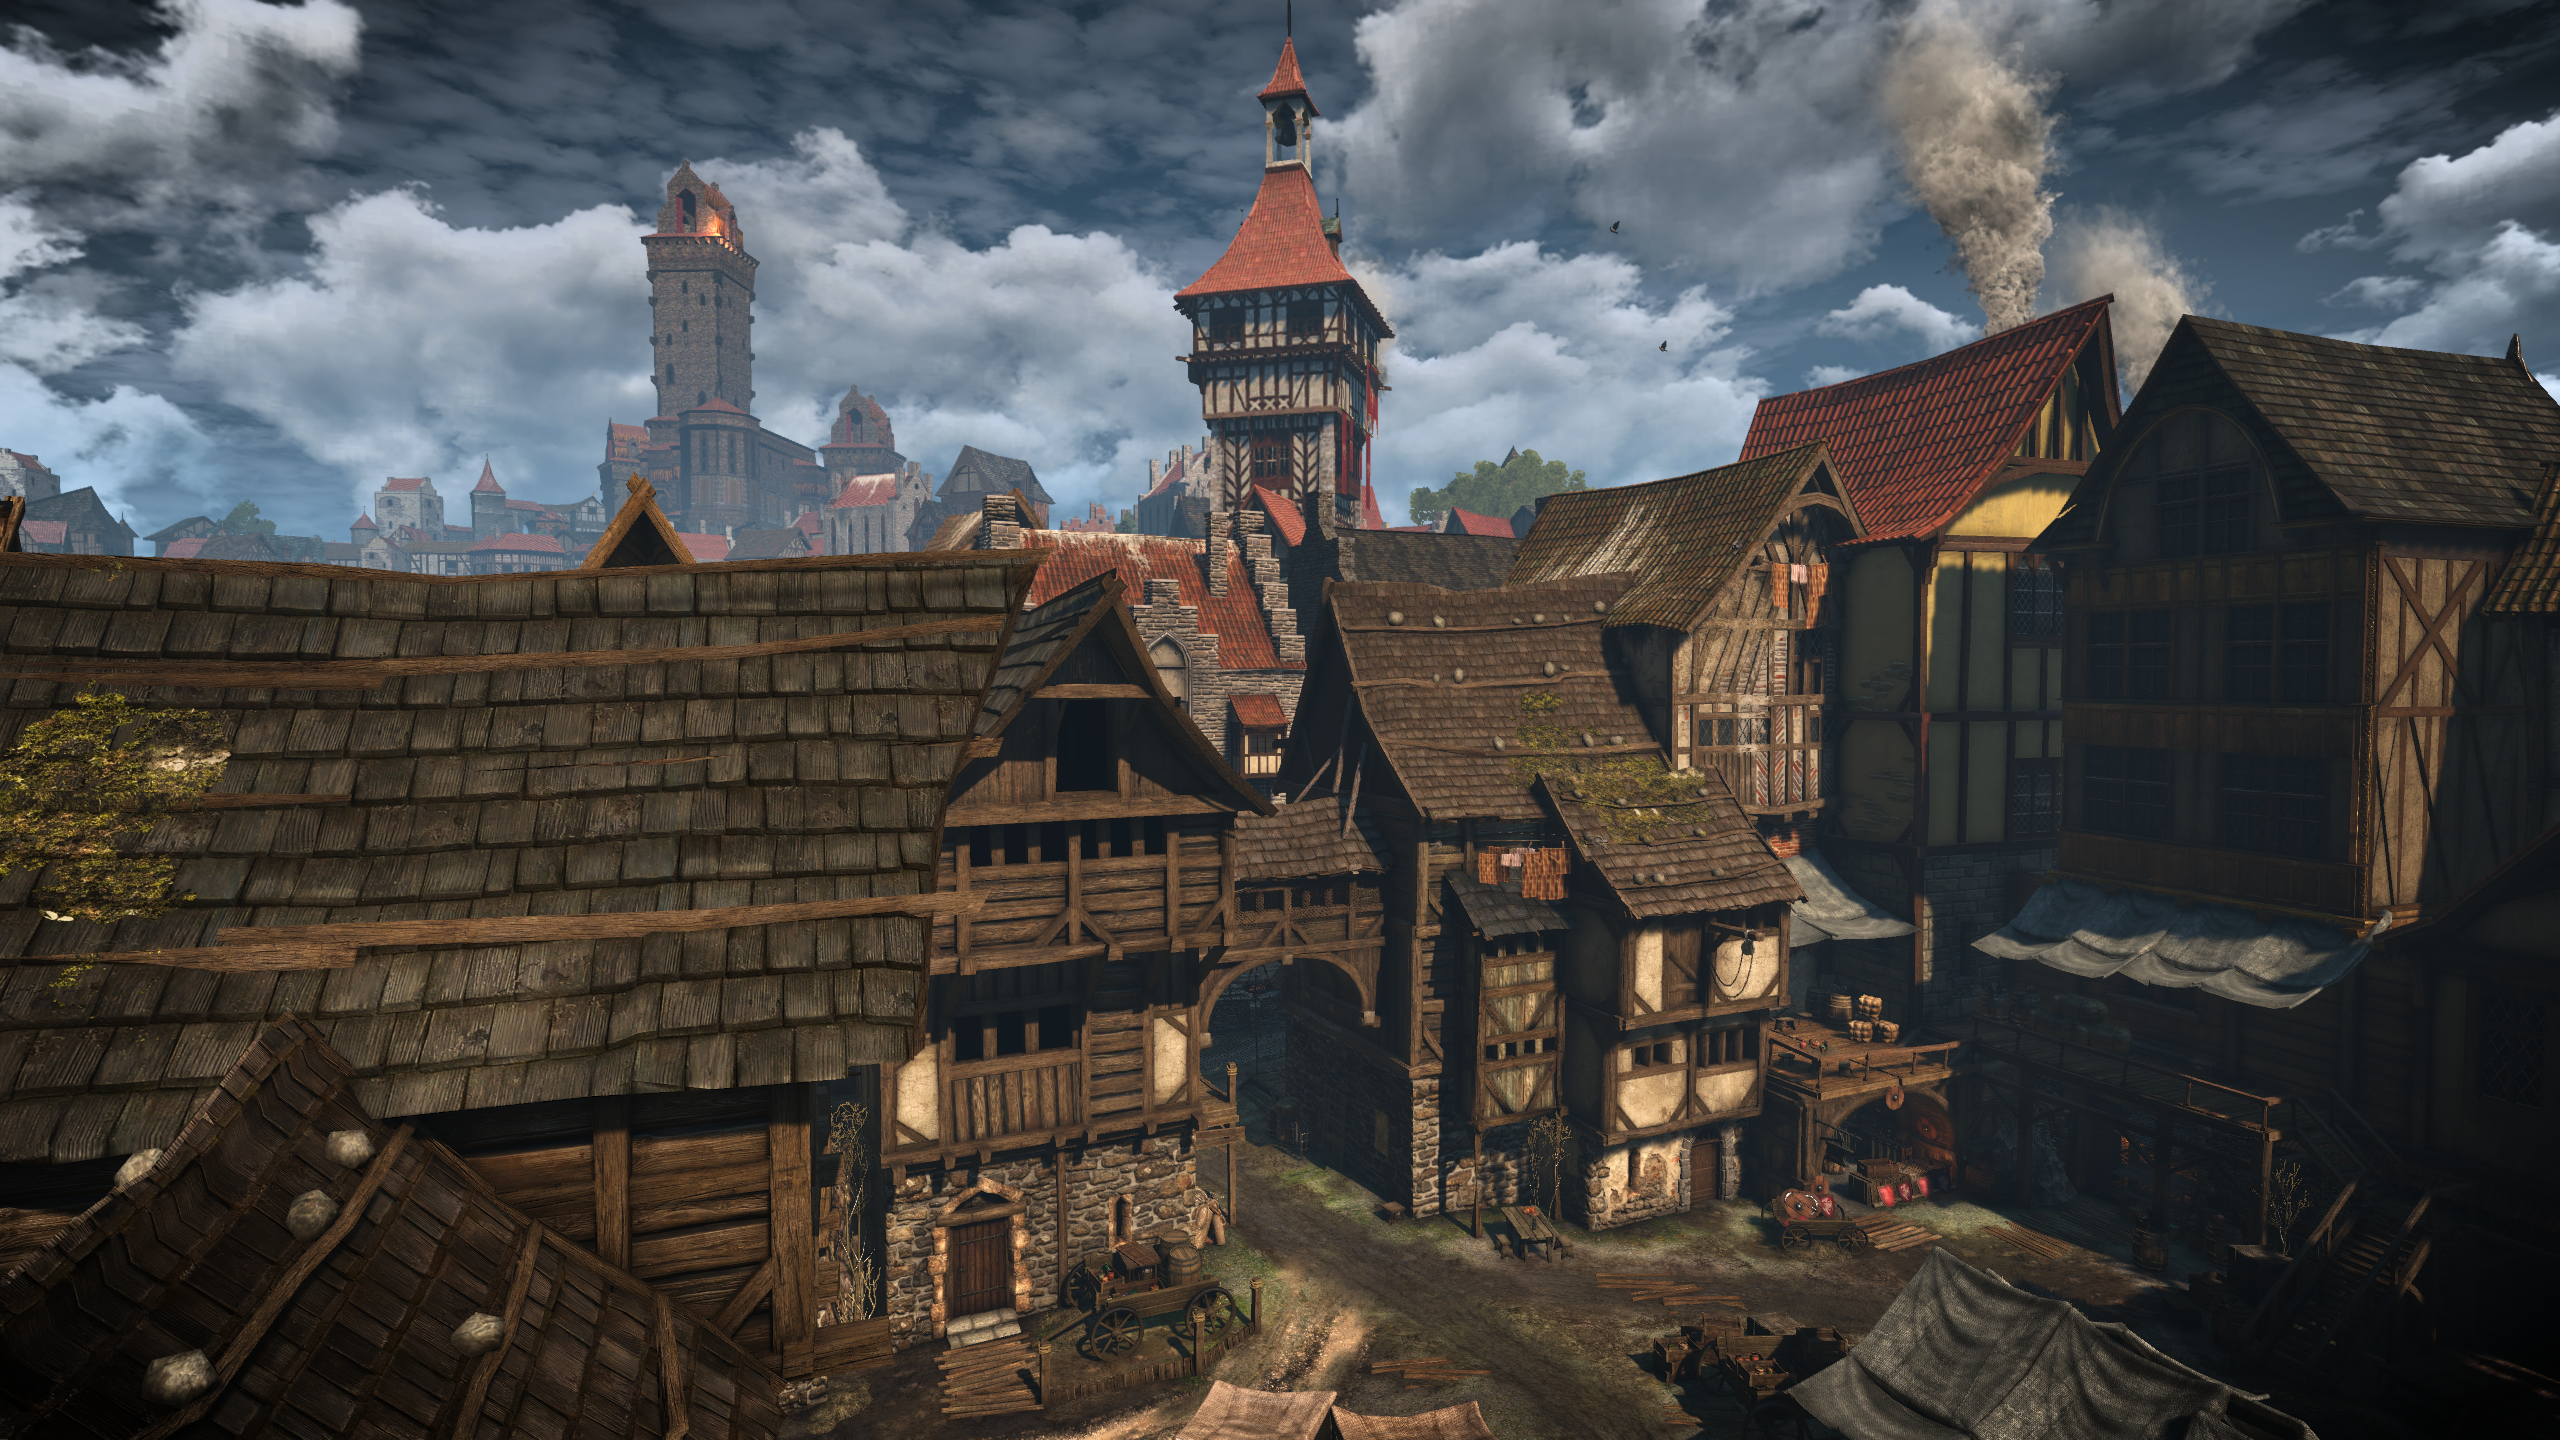 General 2560x1440 The Witcher 3: Wild Hunt Novigrad video games The Witcher fantasy town fantasy city